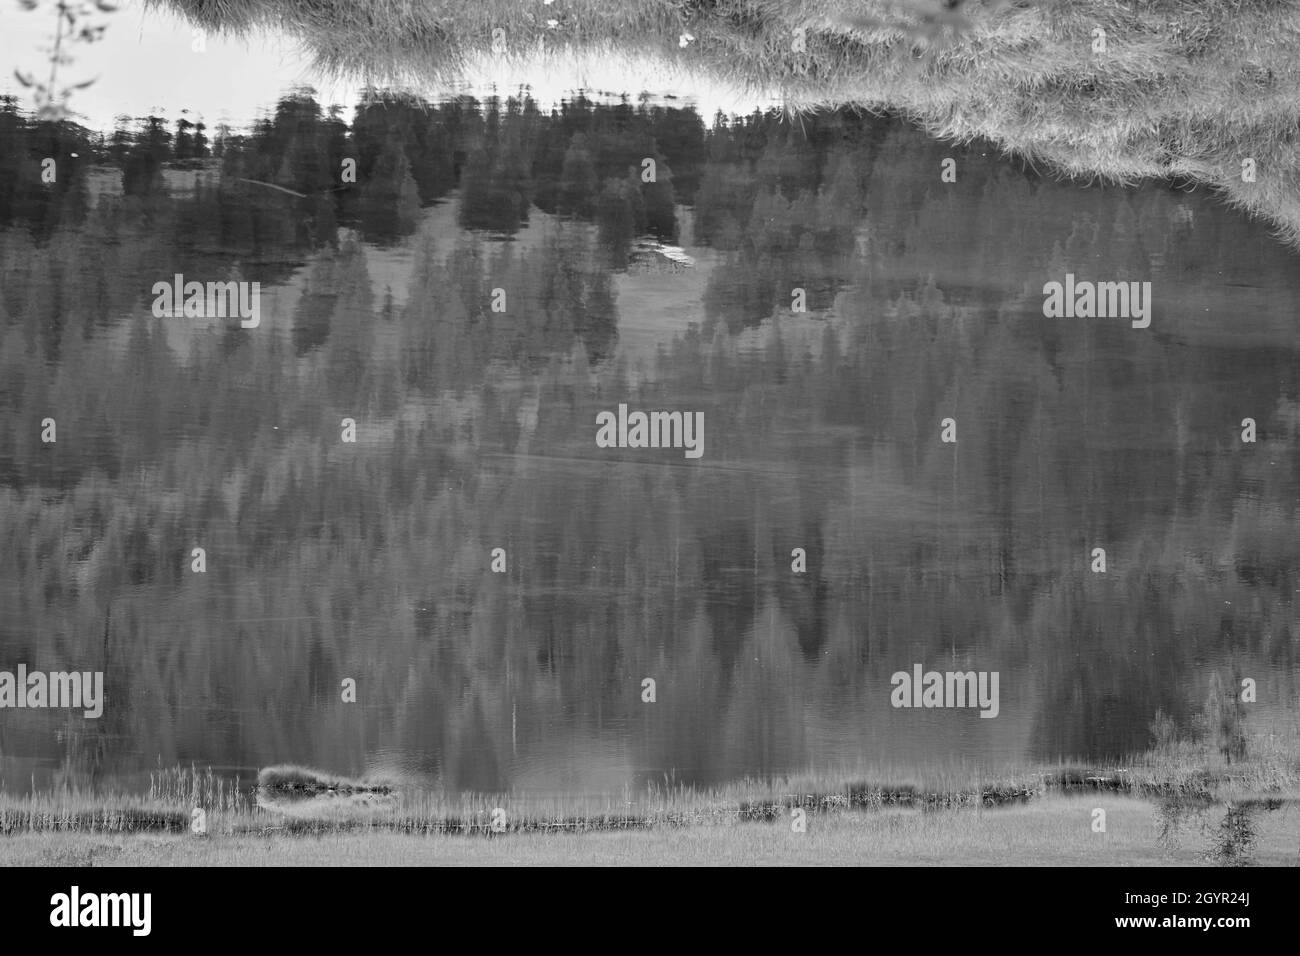 Abstract mountain lake reflections in black & white Stock Photo